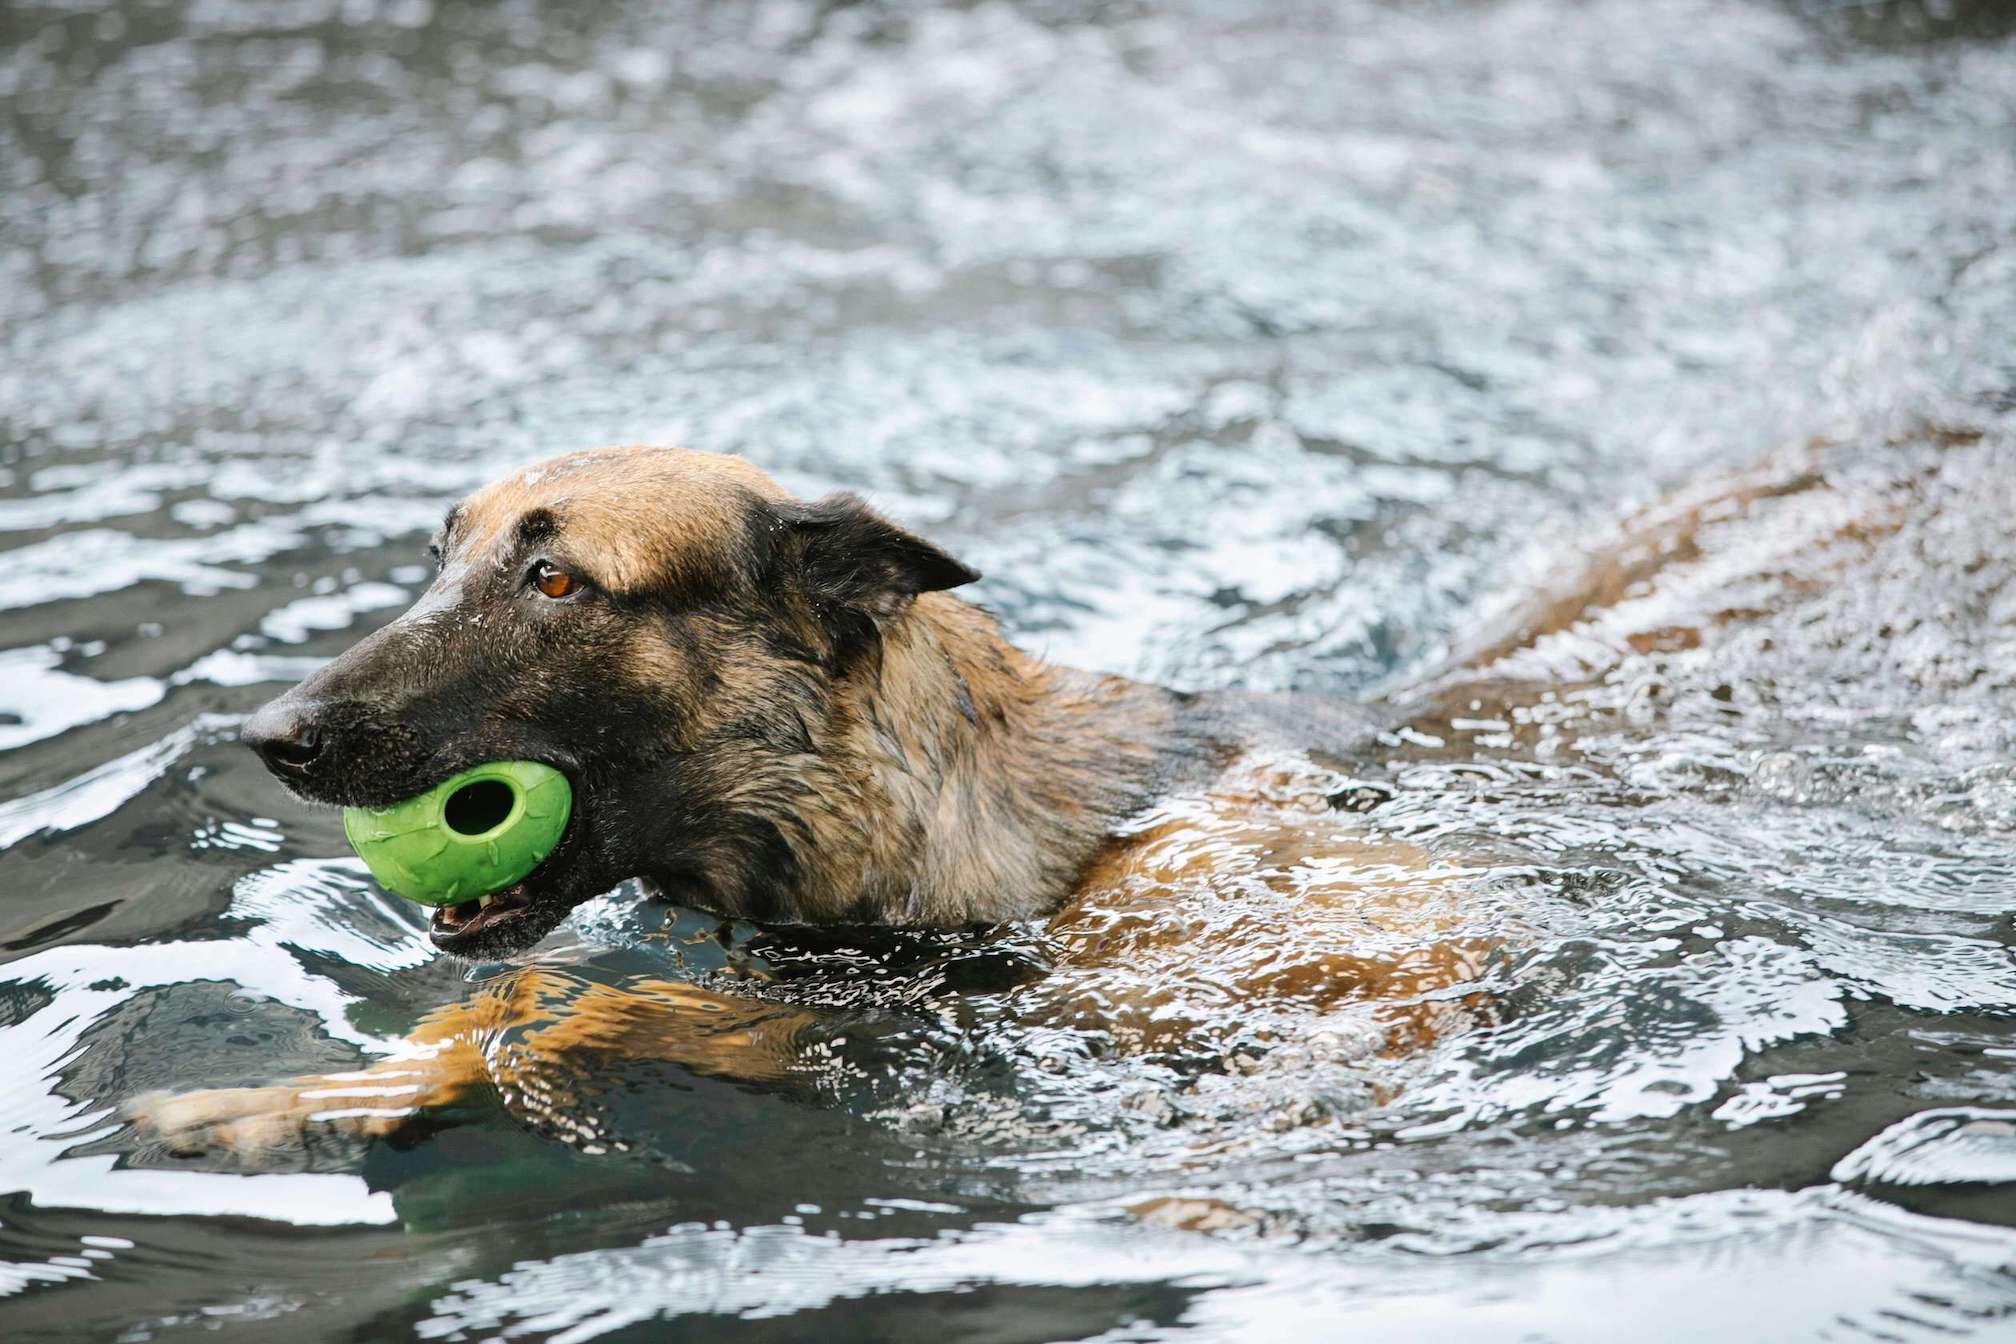 A dog swimming in a pond with a green ball in their mouth